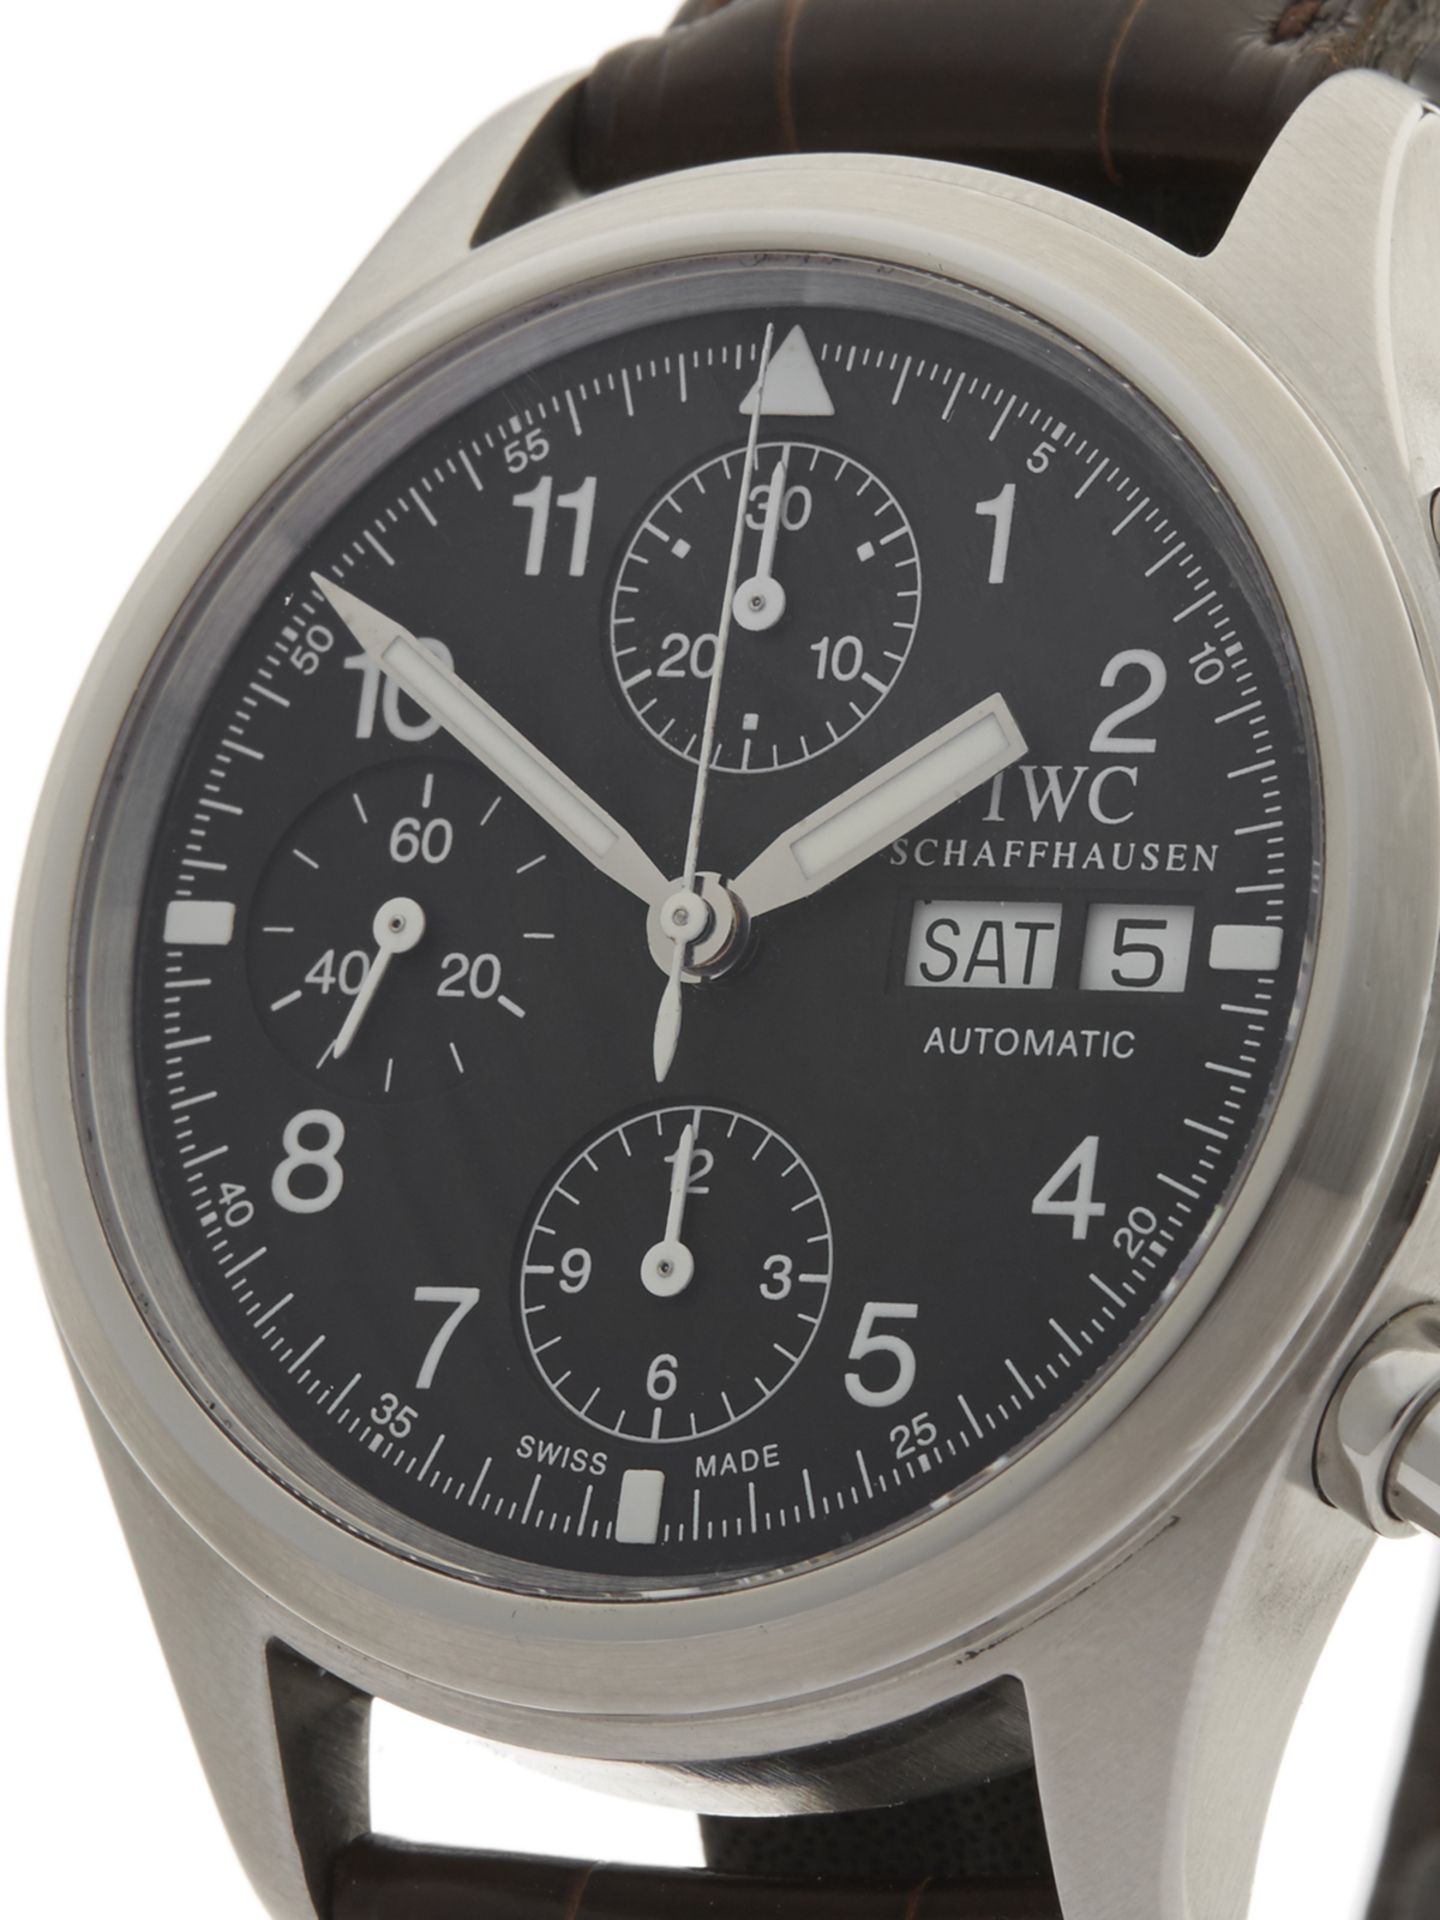 IWC Pilot's Chronograph Fliegerchronograph 39mm Stainless Steel IW3706 - Image 3 of 8